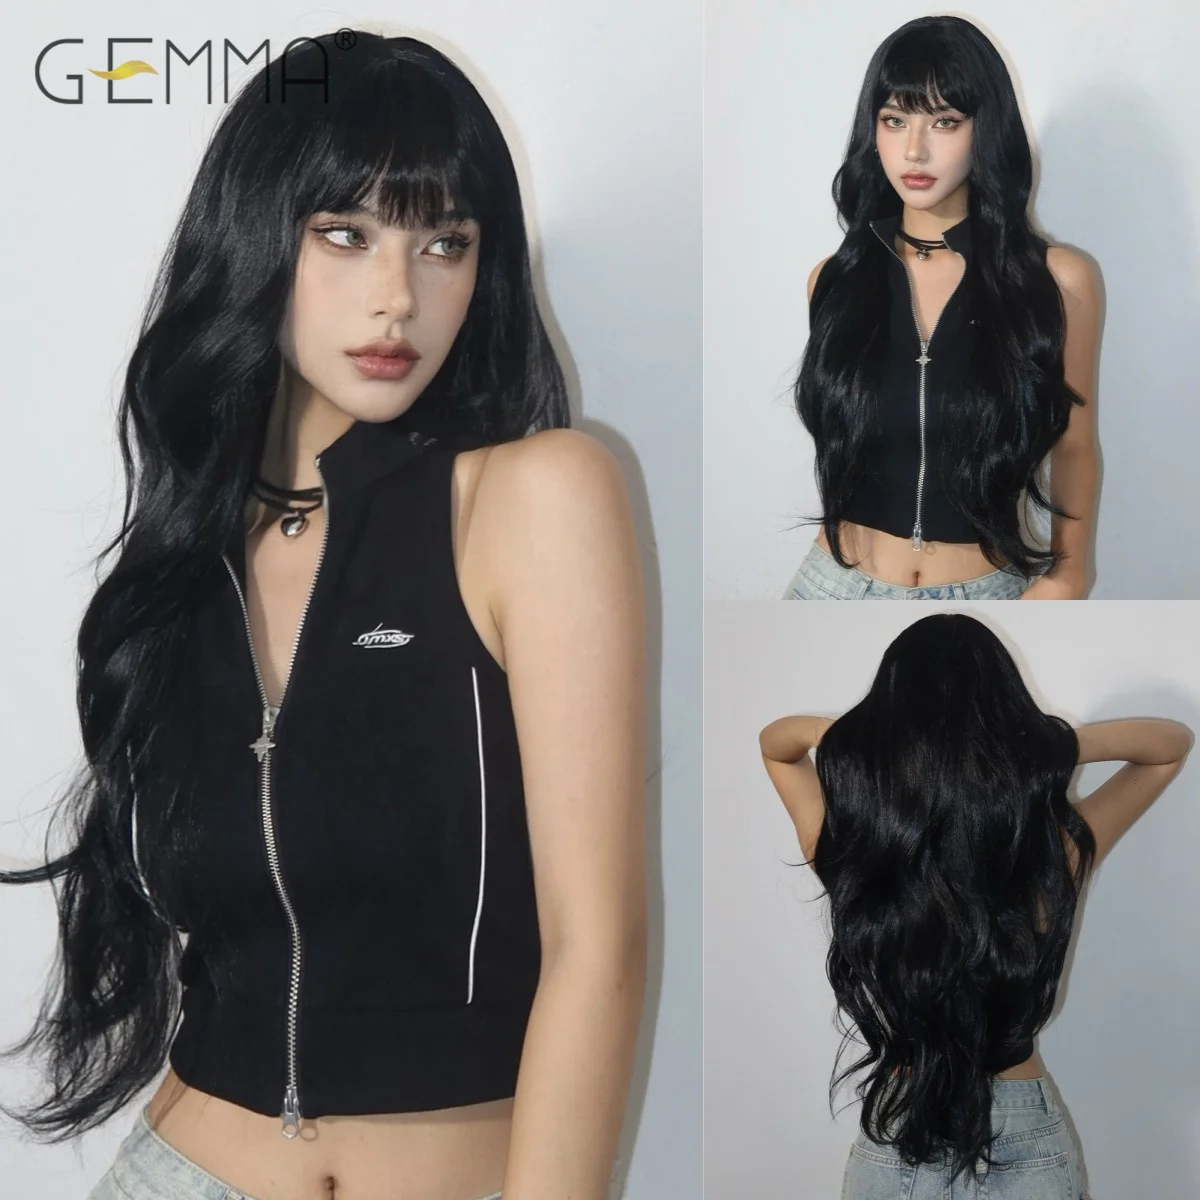 Black Synthetic Long Wavy Wig with Fluffy Bangs Natural Wave Wigs for Women Cosplay Daily Use Fake Hair Heat Resistant Fibre la sylphide synthetic wig long deep wave root dark brown ombre brown wigs with bangs for women party daily wig heat resistant